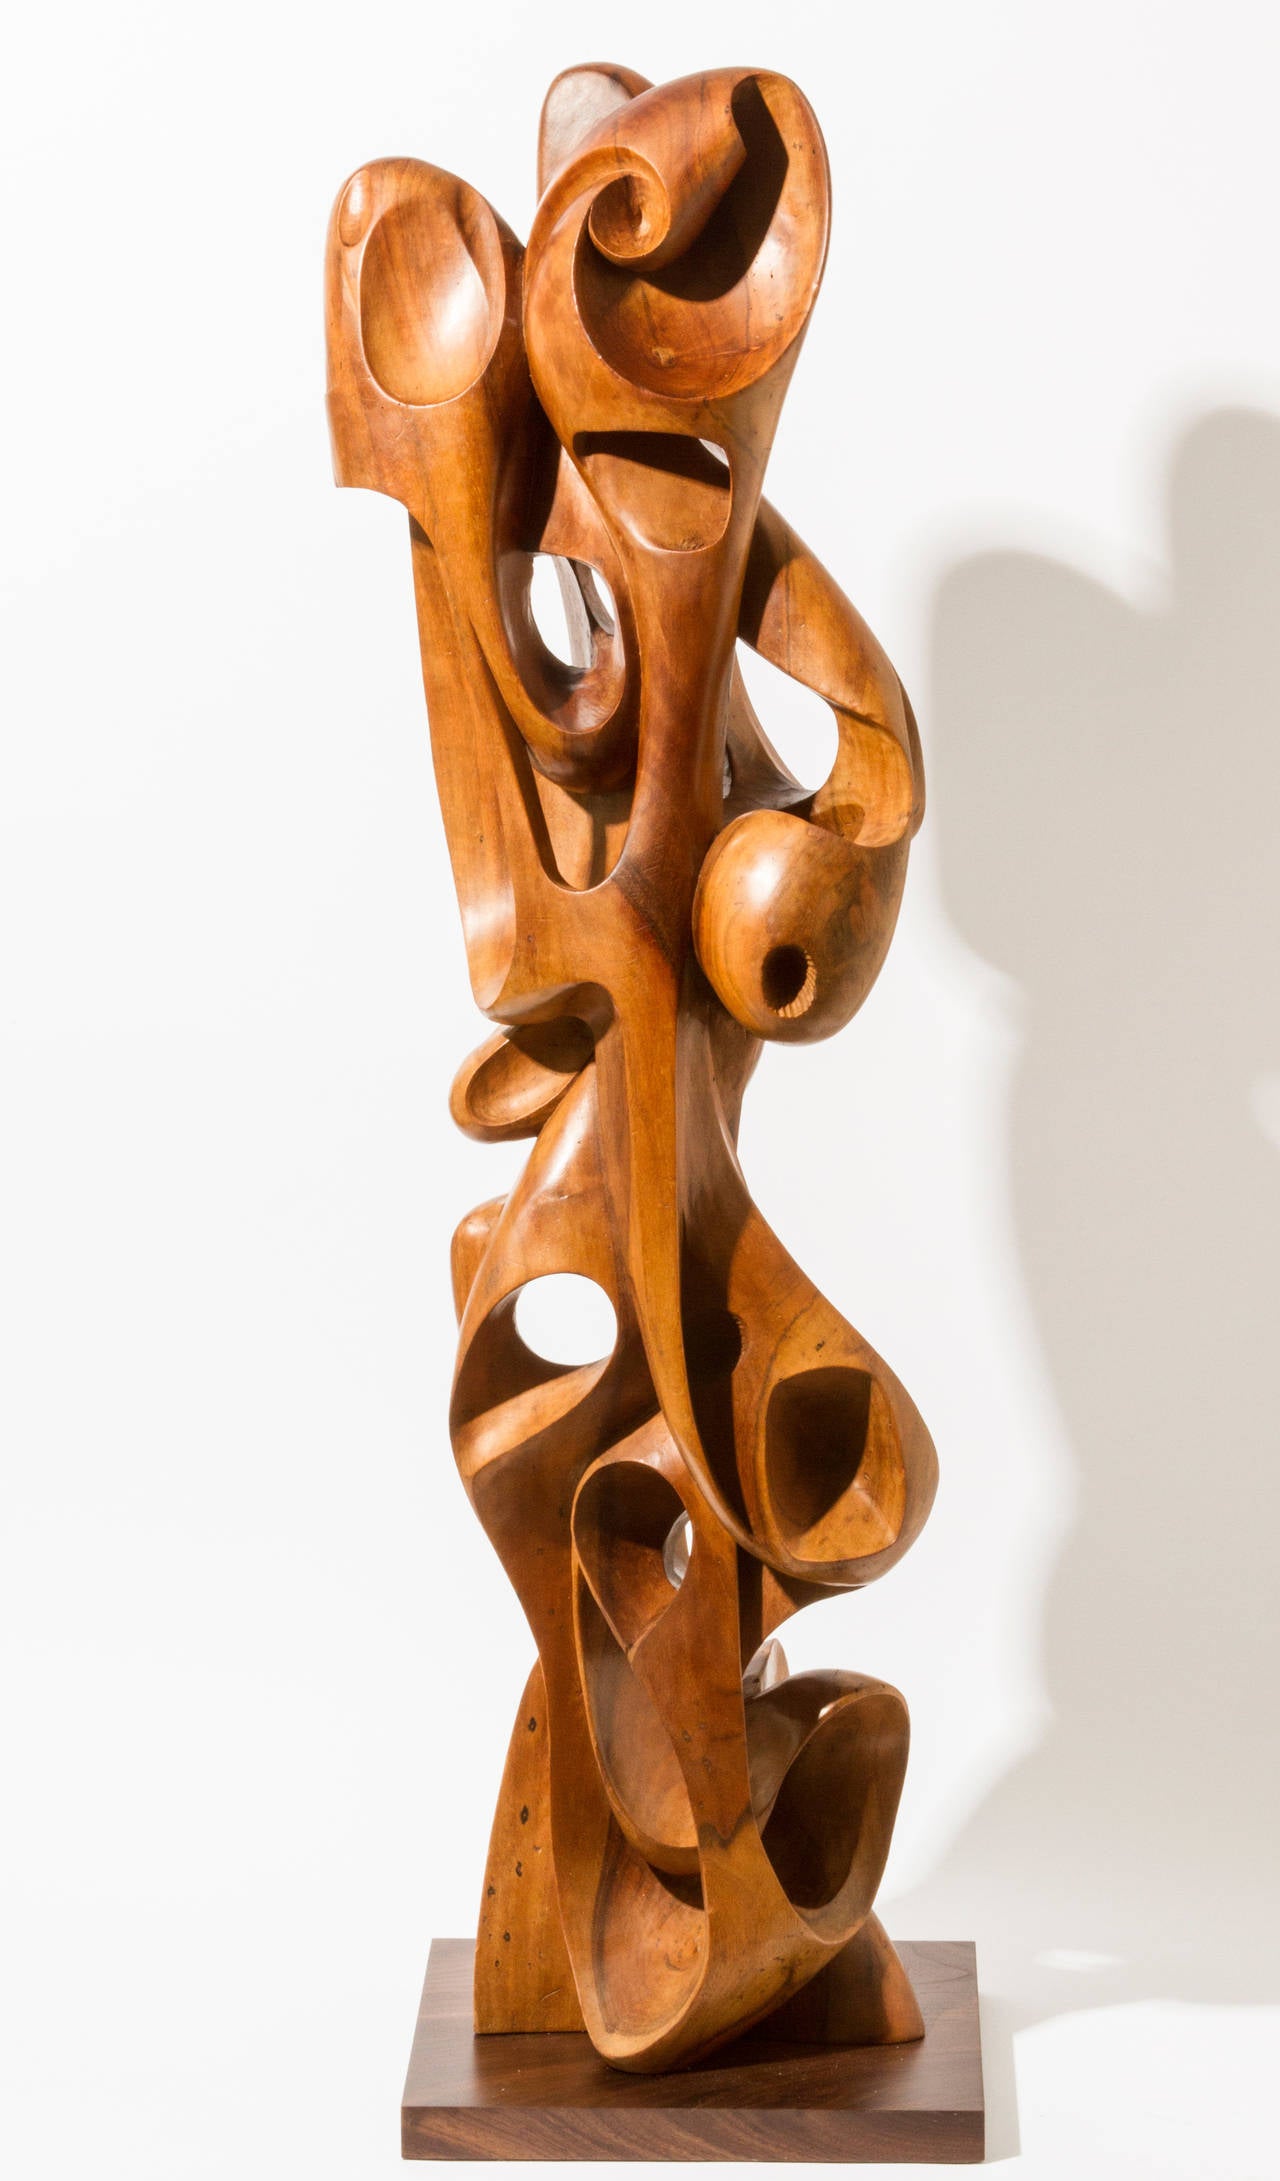 North American Tall Biomorphic Carved Wood Sculpture